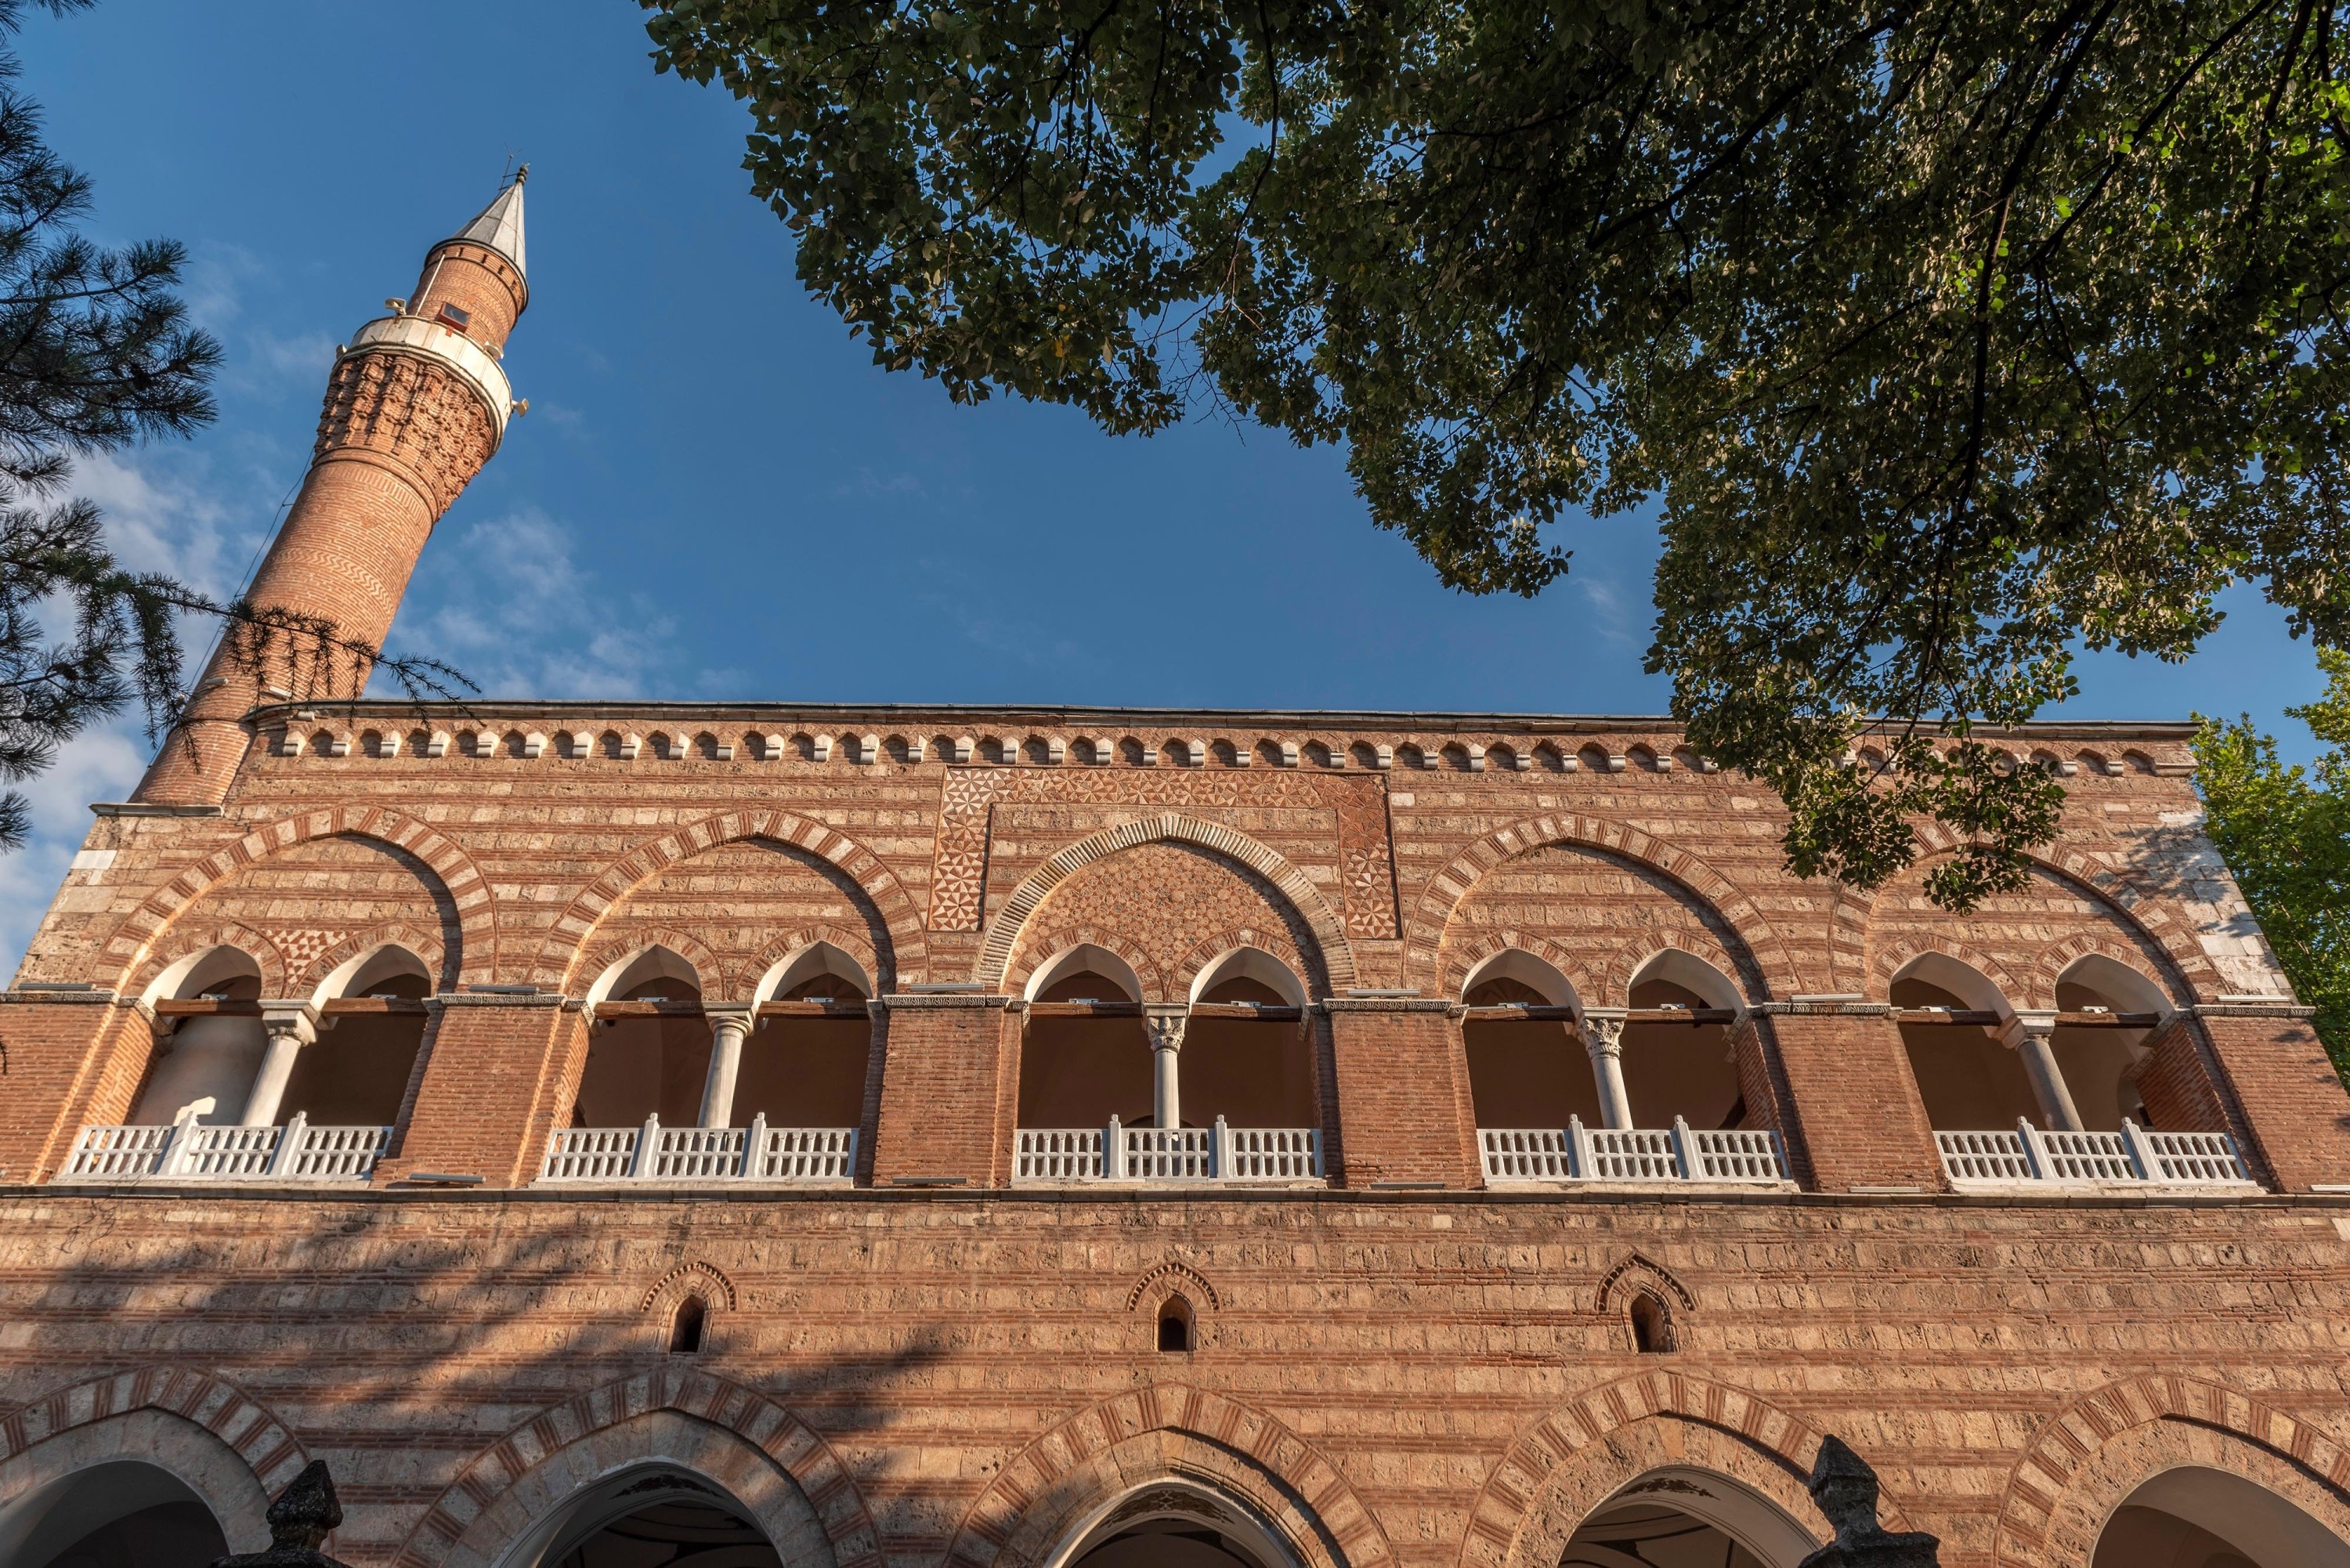 The Hüdavendigar Mosque, commissioned by Sultan Murad I, in Bursa.